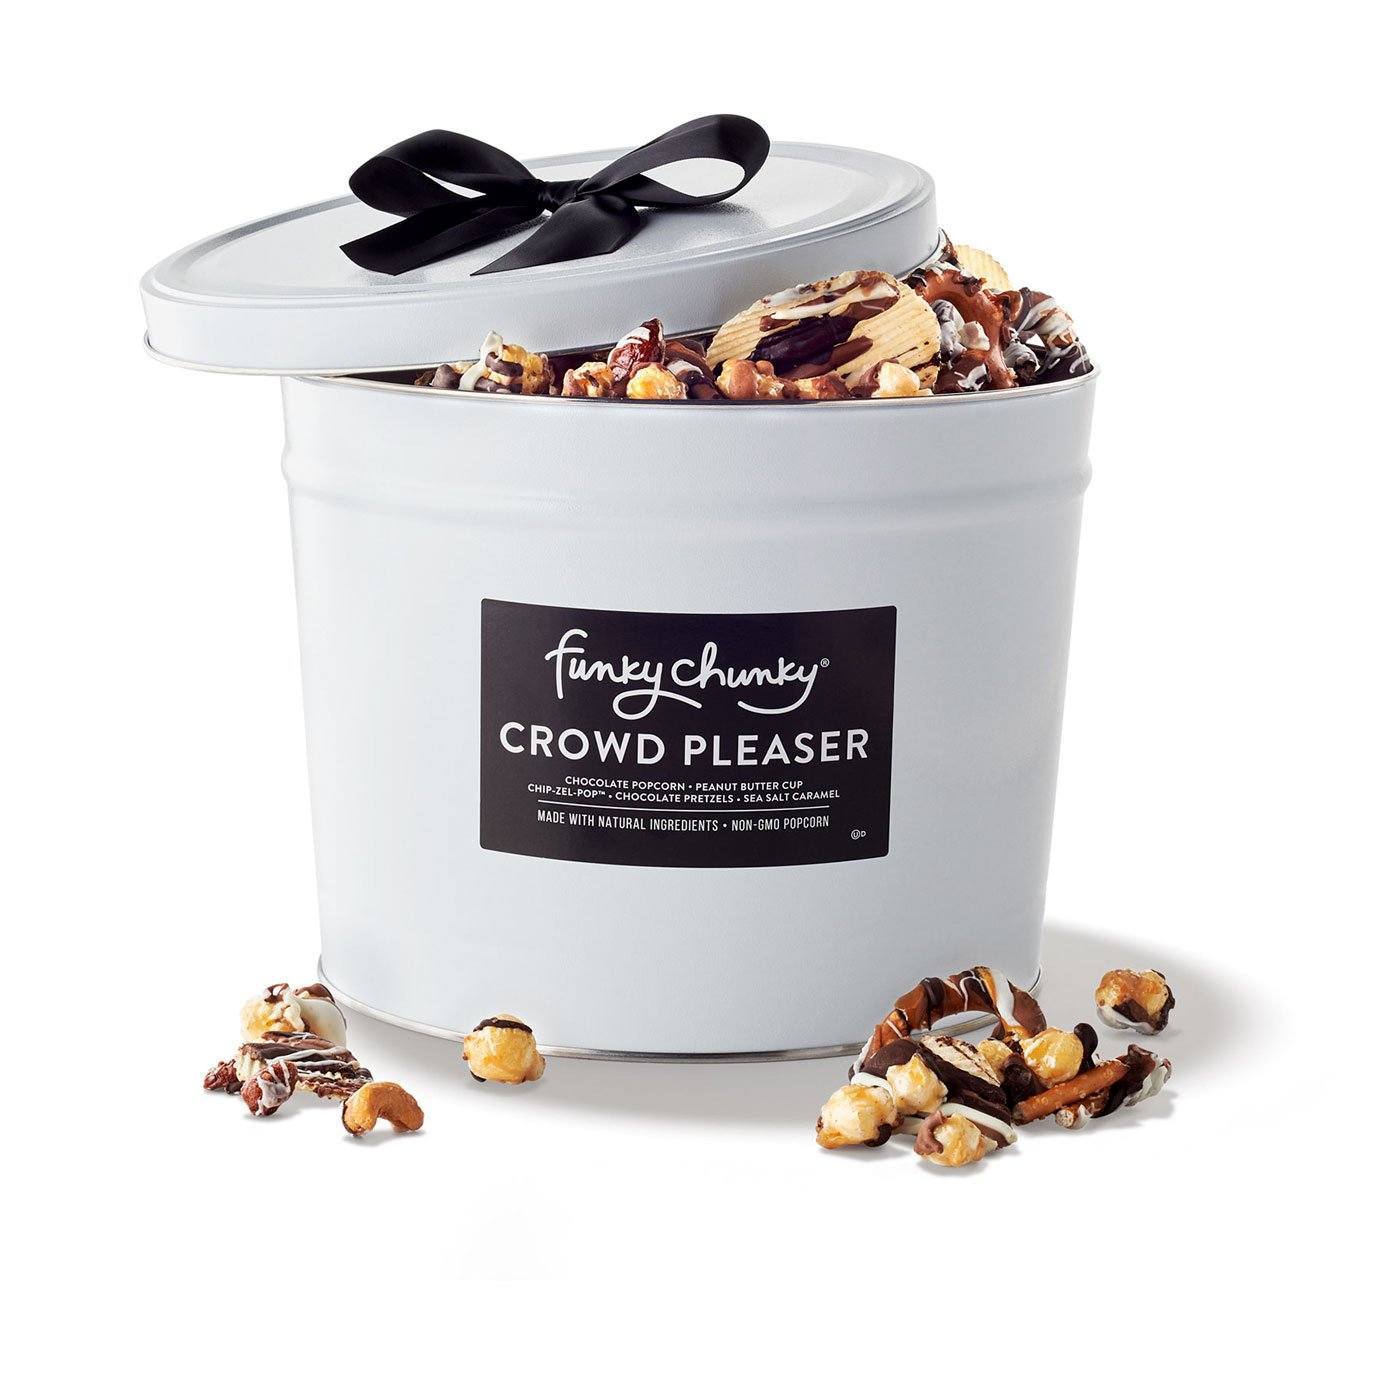 Crowd Pleaser Gift Tin 3 lb-td {border: 1px solid #ccc;}br {mso-data-placement:same-cell;} Our Crowd Pleaser Gift Tin is packed to the brim with popcorn and pretzels. It features five flavors: Nutty Choco Pop, Chocolate Pretzel, Peanut Butter Cup, Sea Salt Caramel and Chip Zel Pop. Contains five 10 oz bags.-Funky Chunky